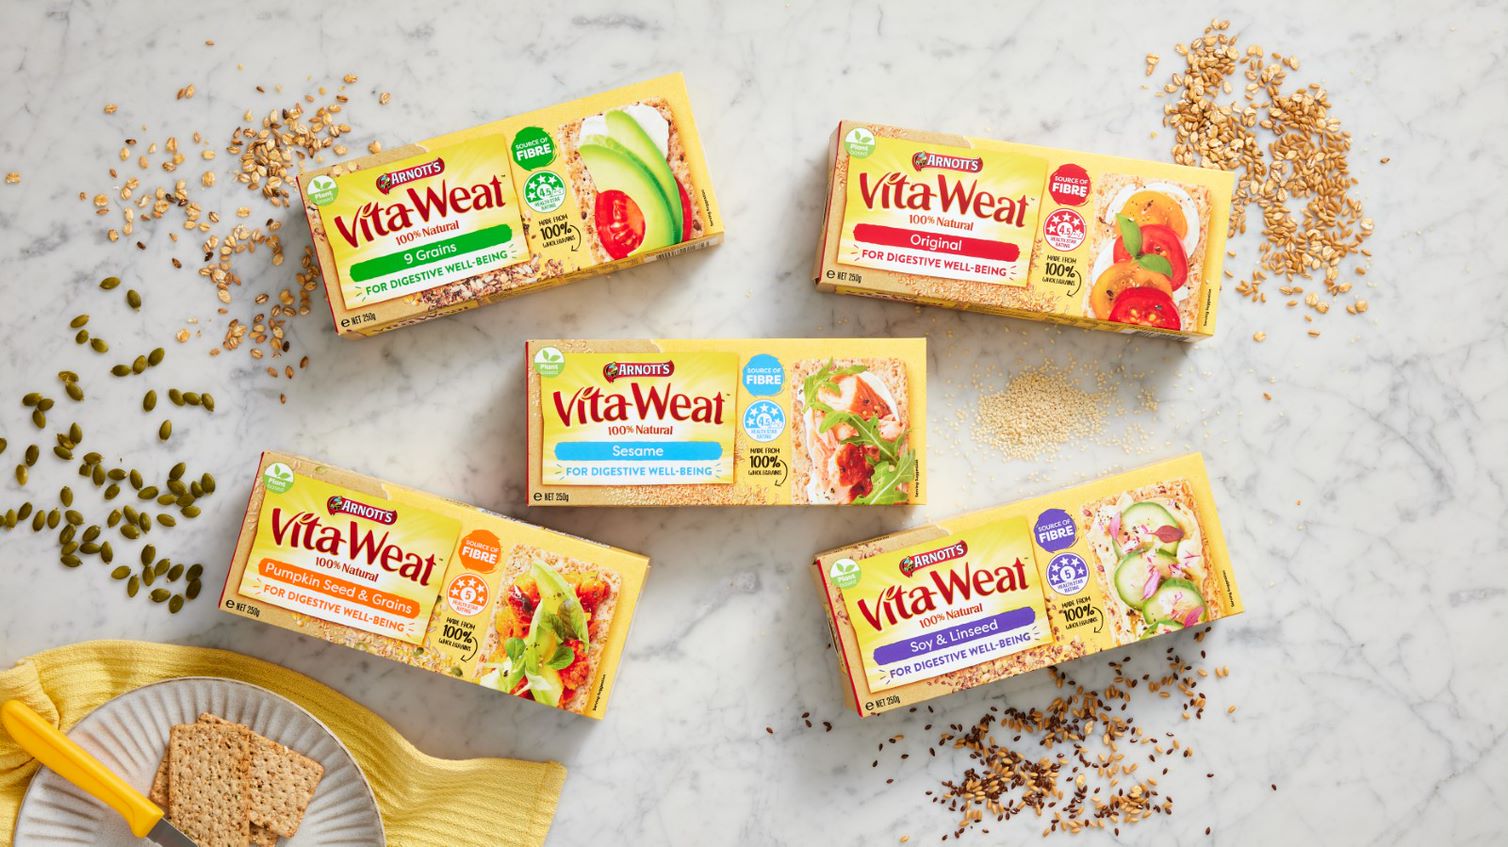 Arnott’s Vita-Weat: a source of fibre for your digestive wellbeing